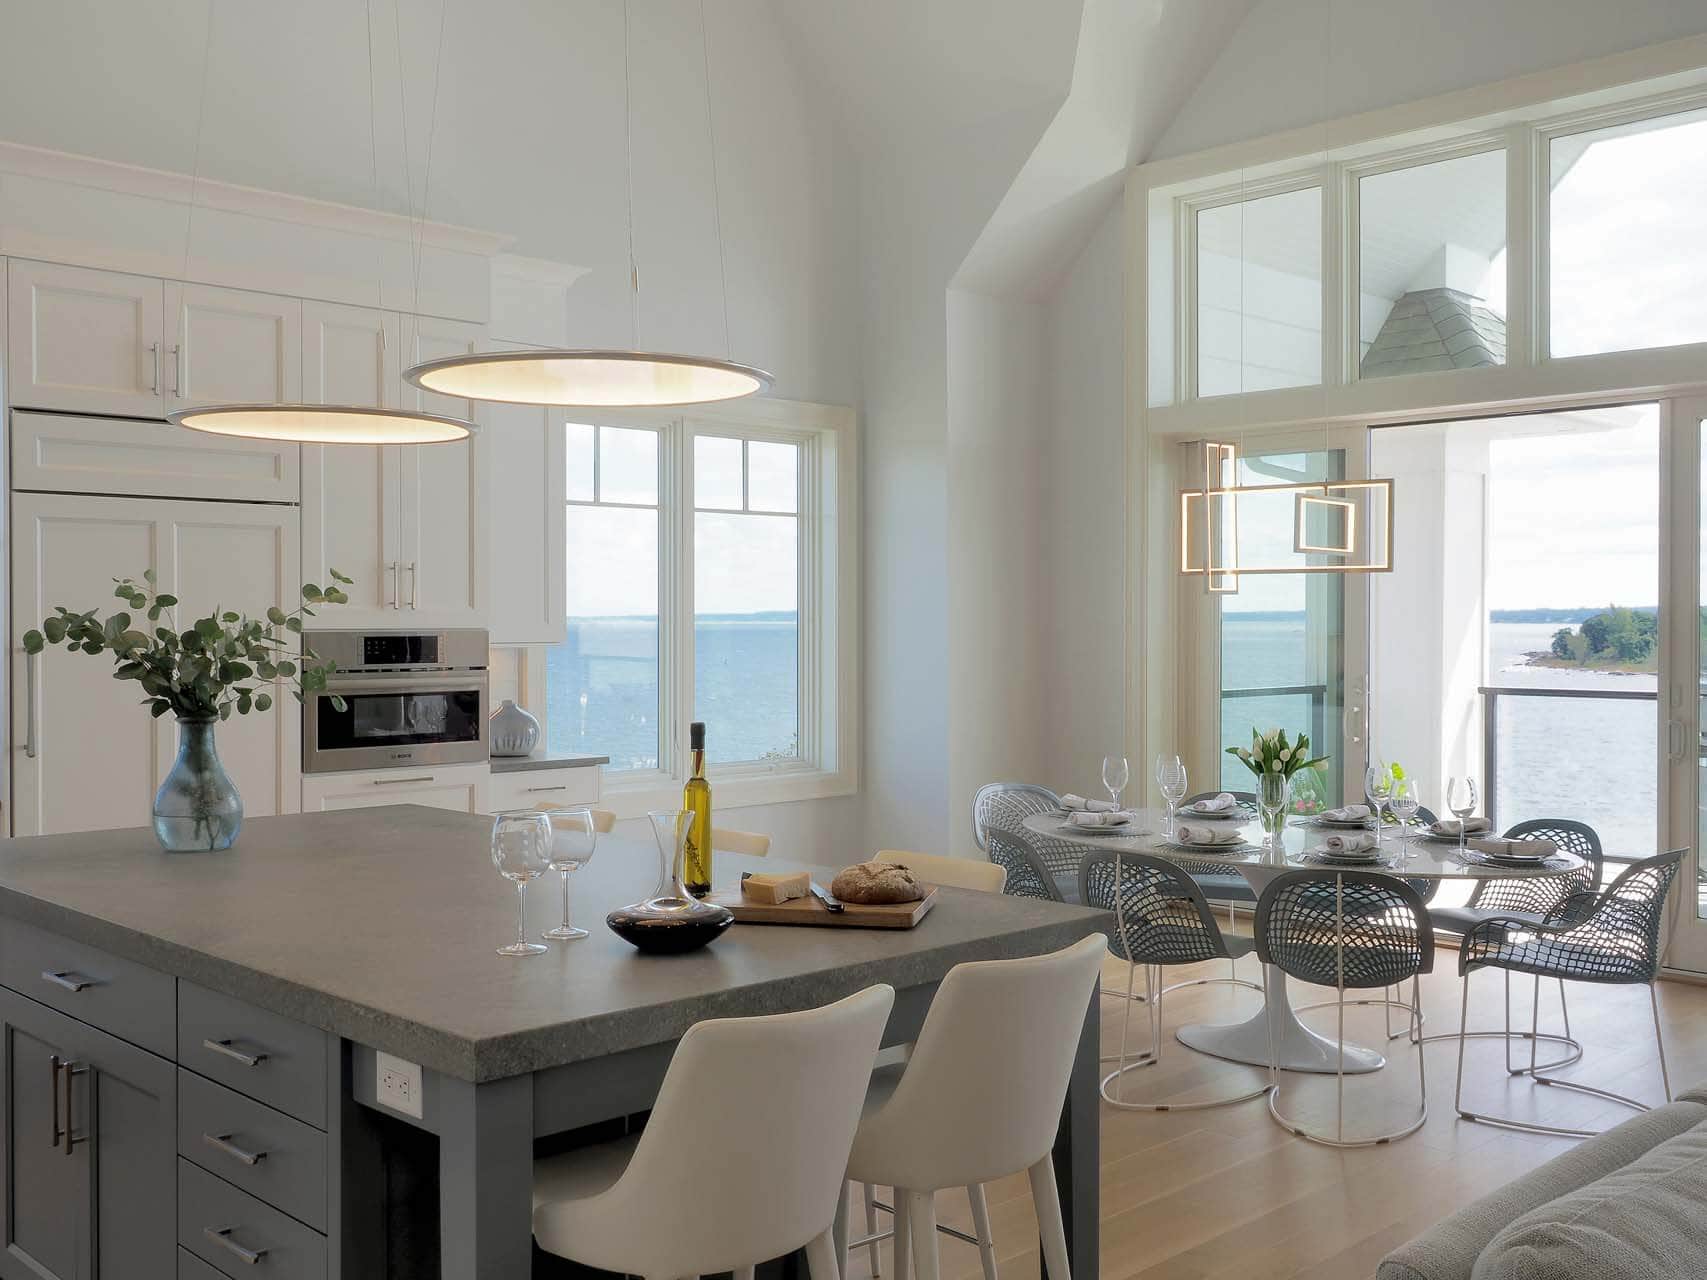 Luxury condo kitchen features granite-topped island with seating, illuminated by contemporary disc-shaped pendants.